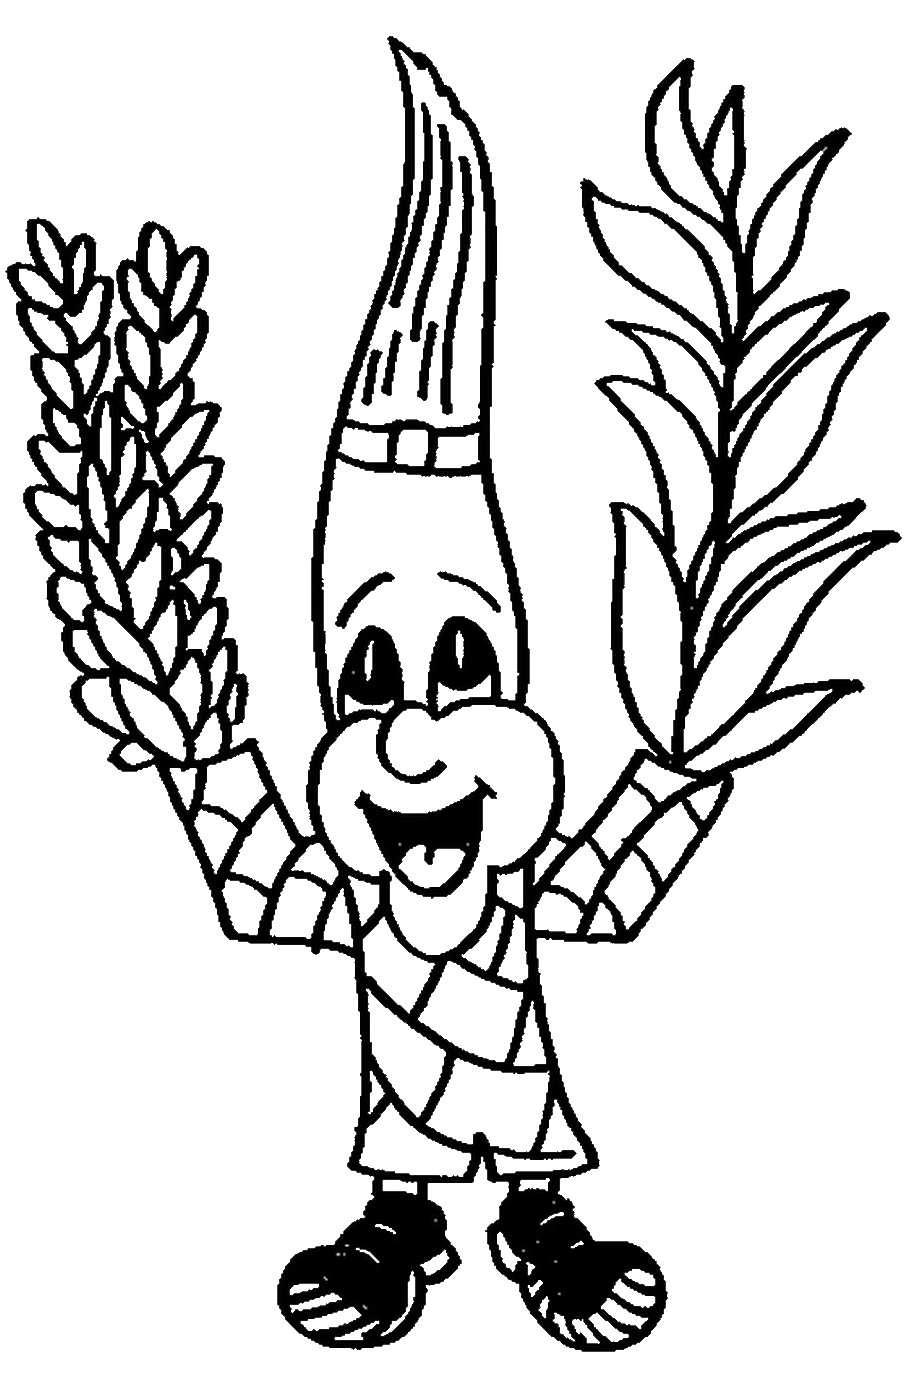 Sukkot Coloring Page For Kids